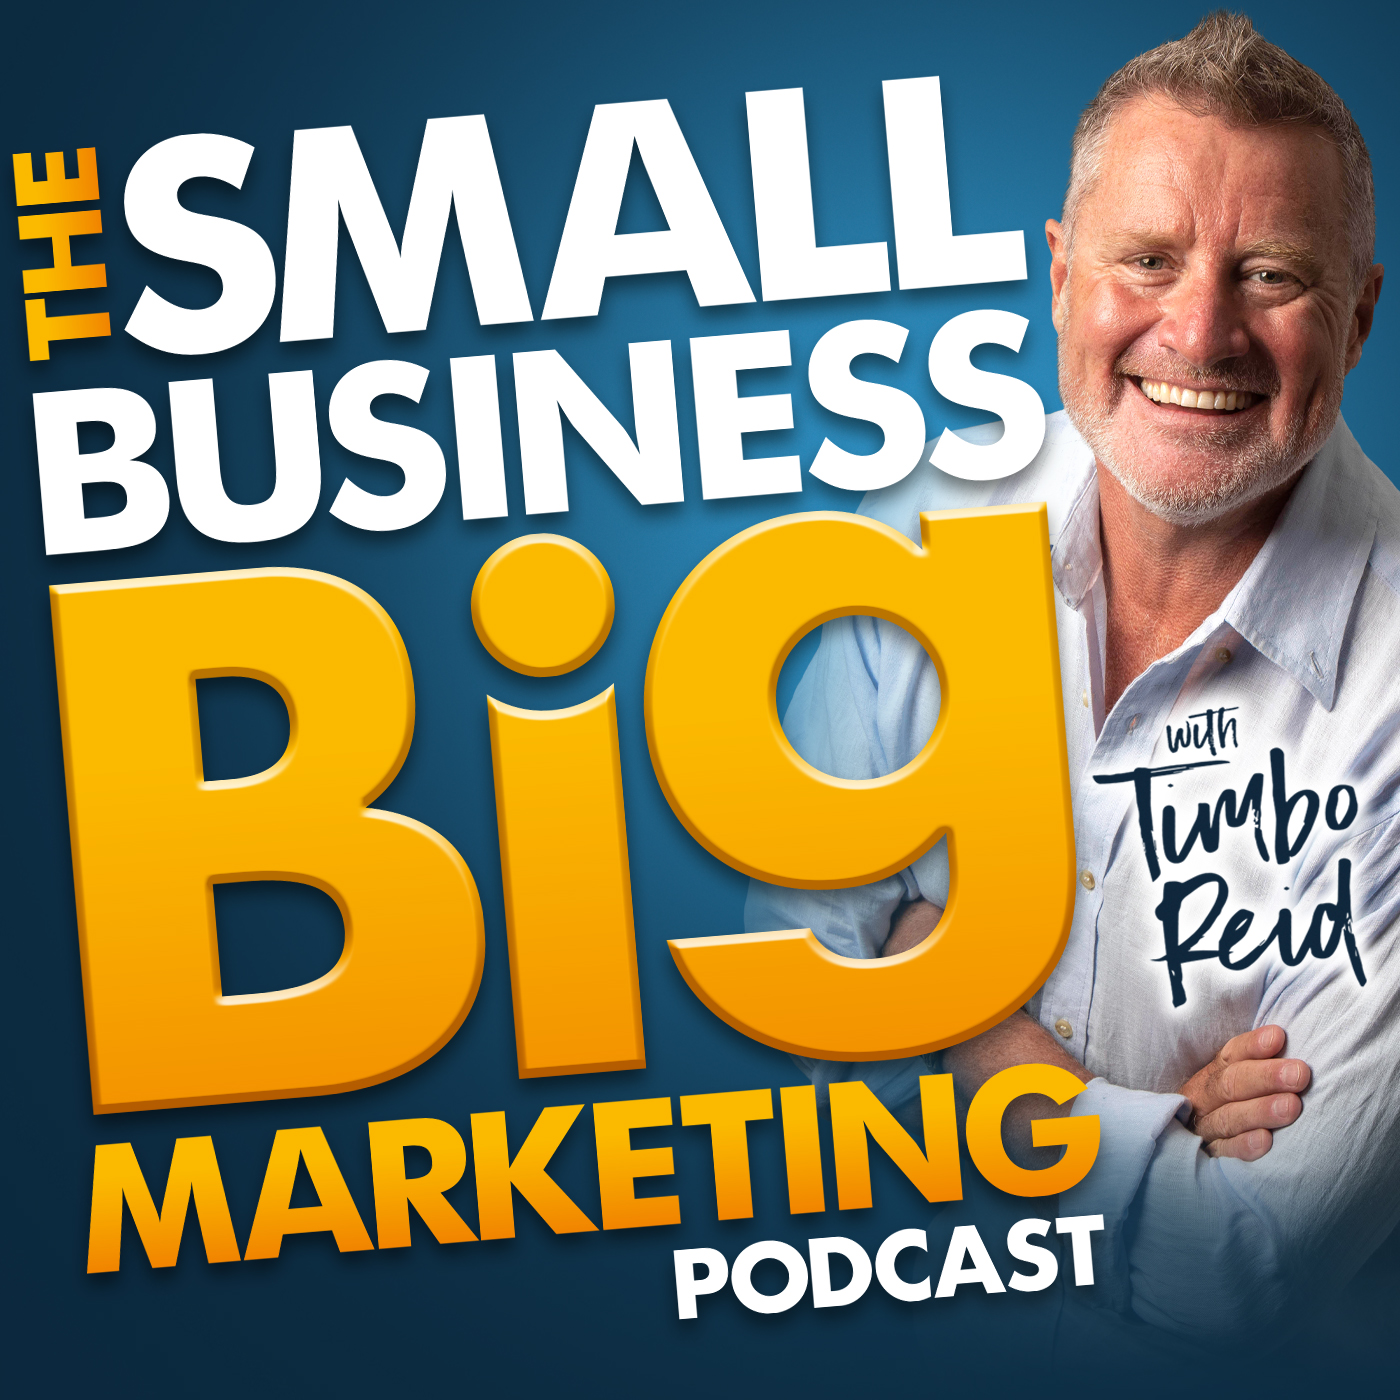 People first, profit second built Belly Bands' Carol Brunswick a very caring business | #595